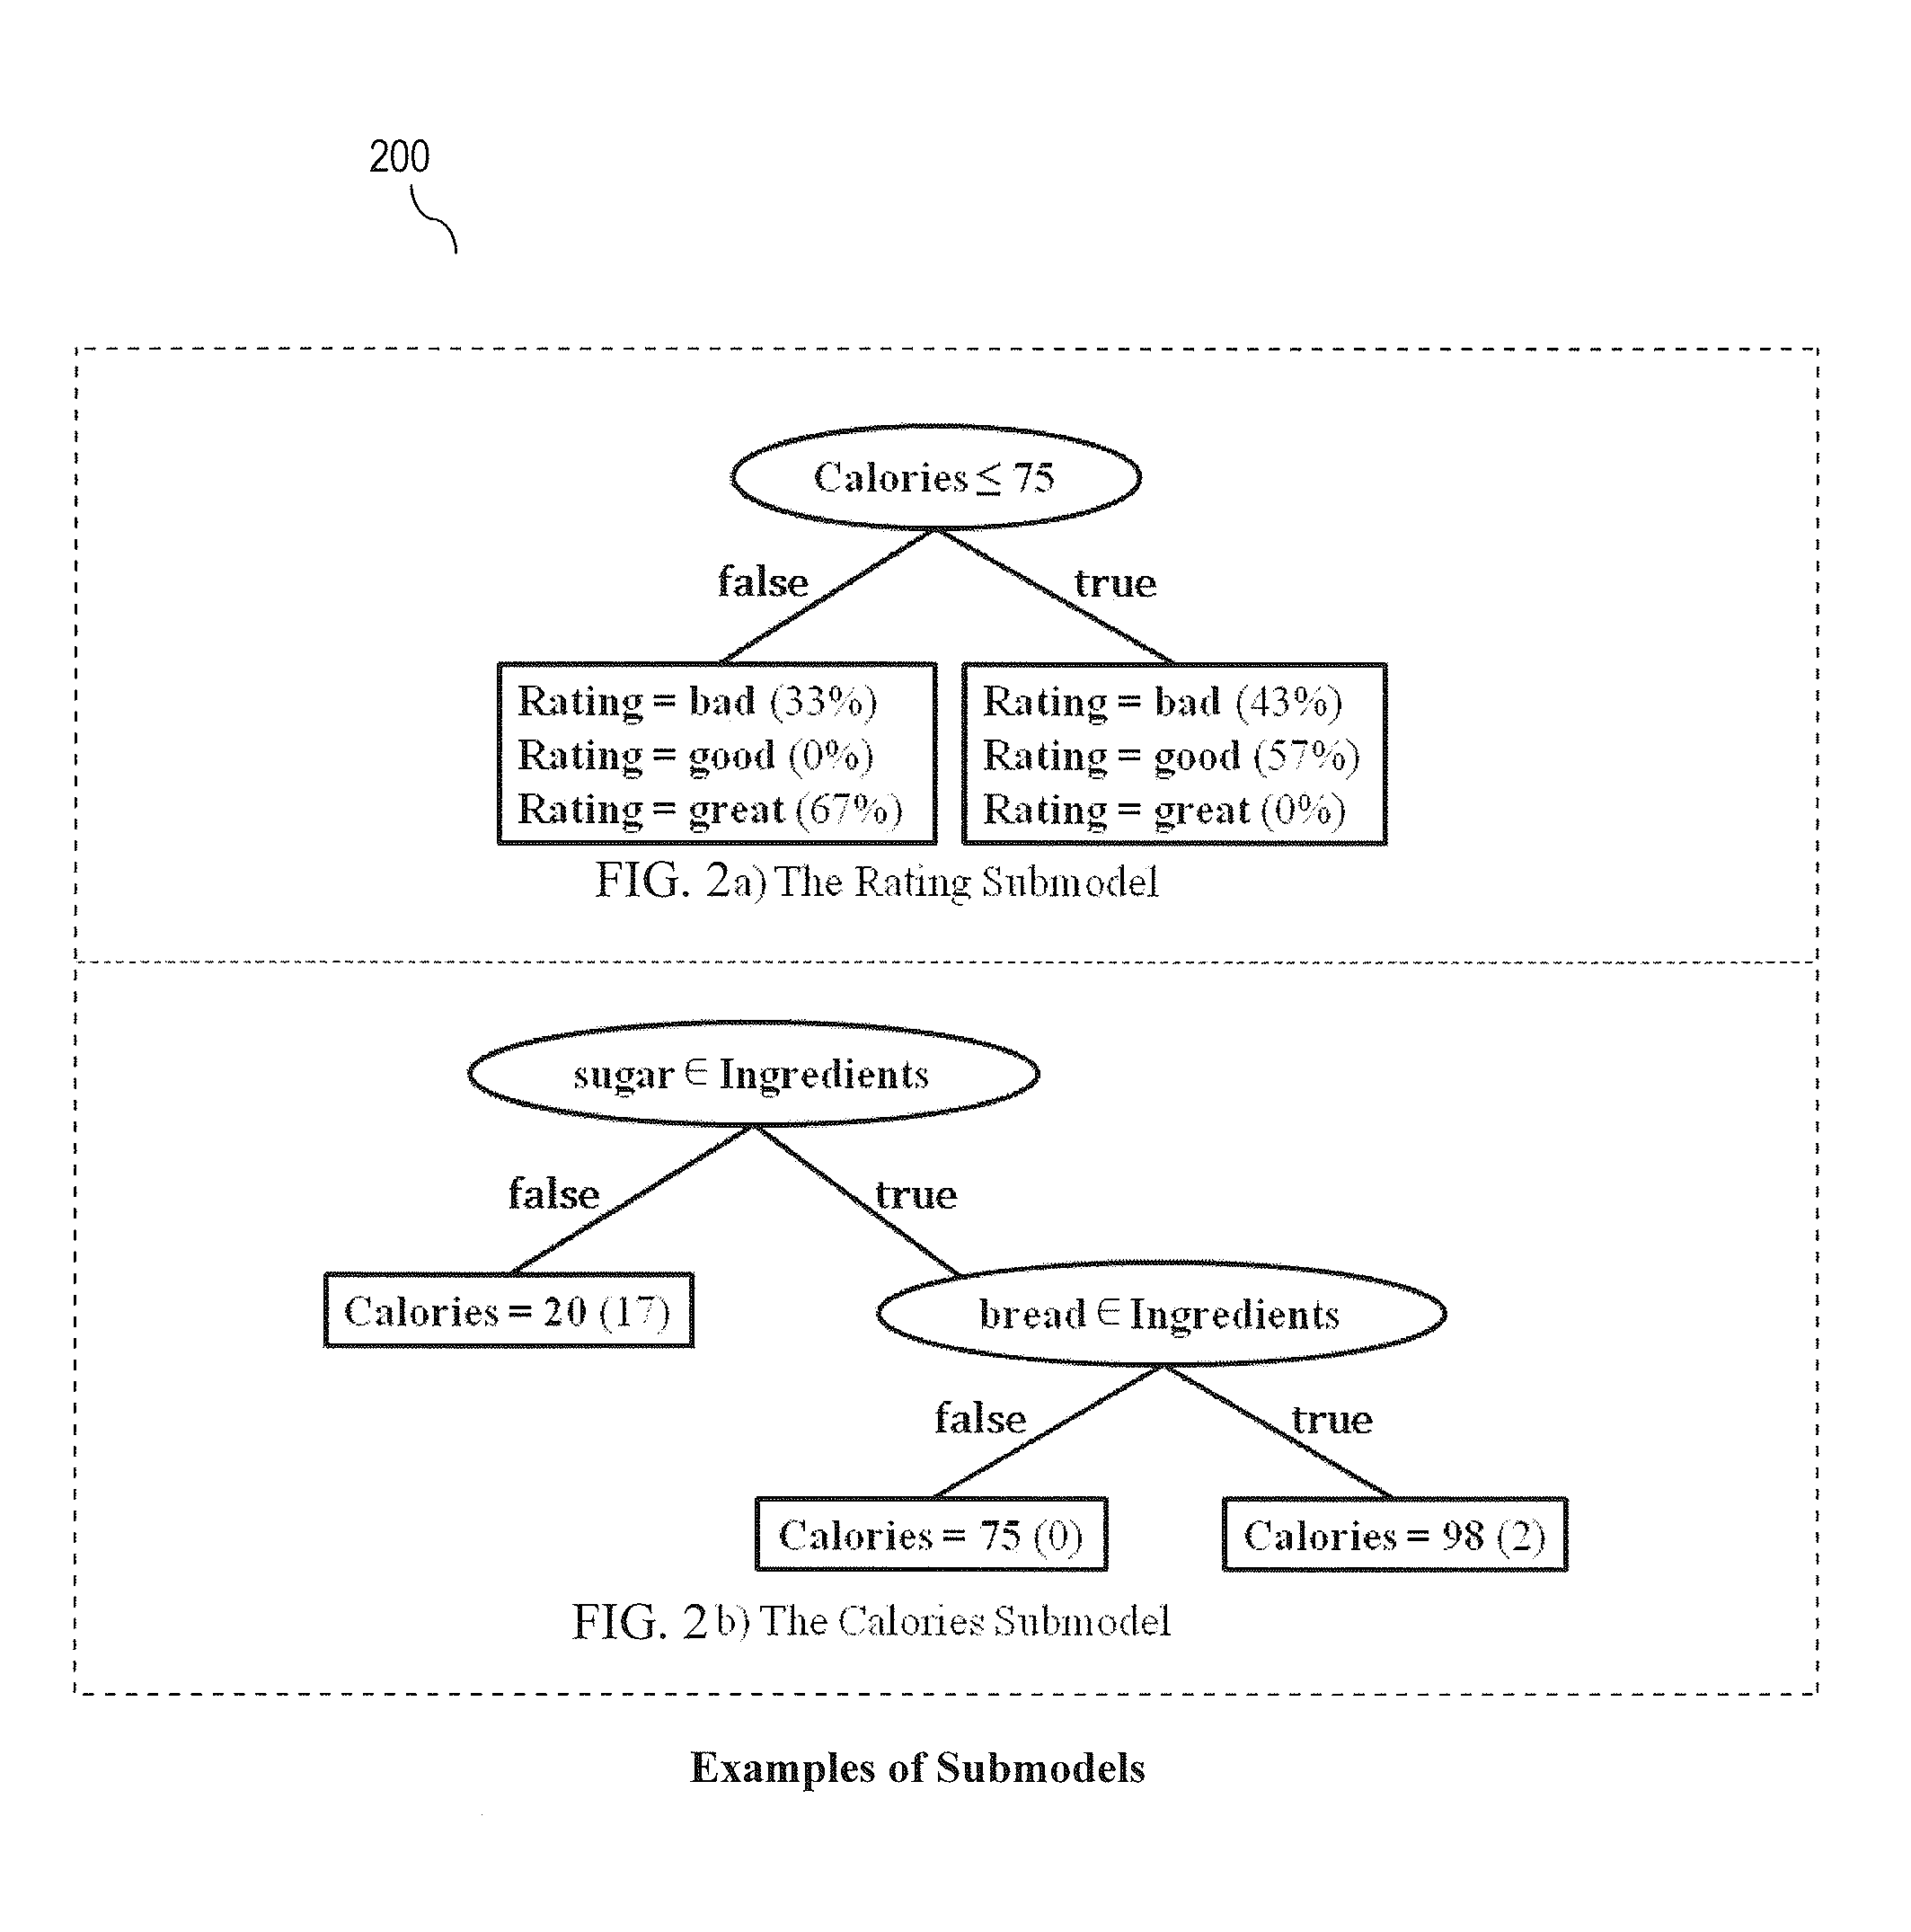 Anomaly Detecting for Database Systems